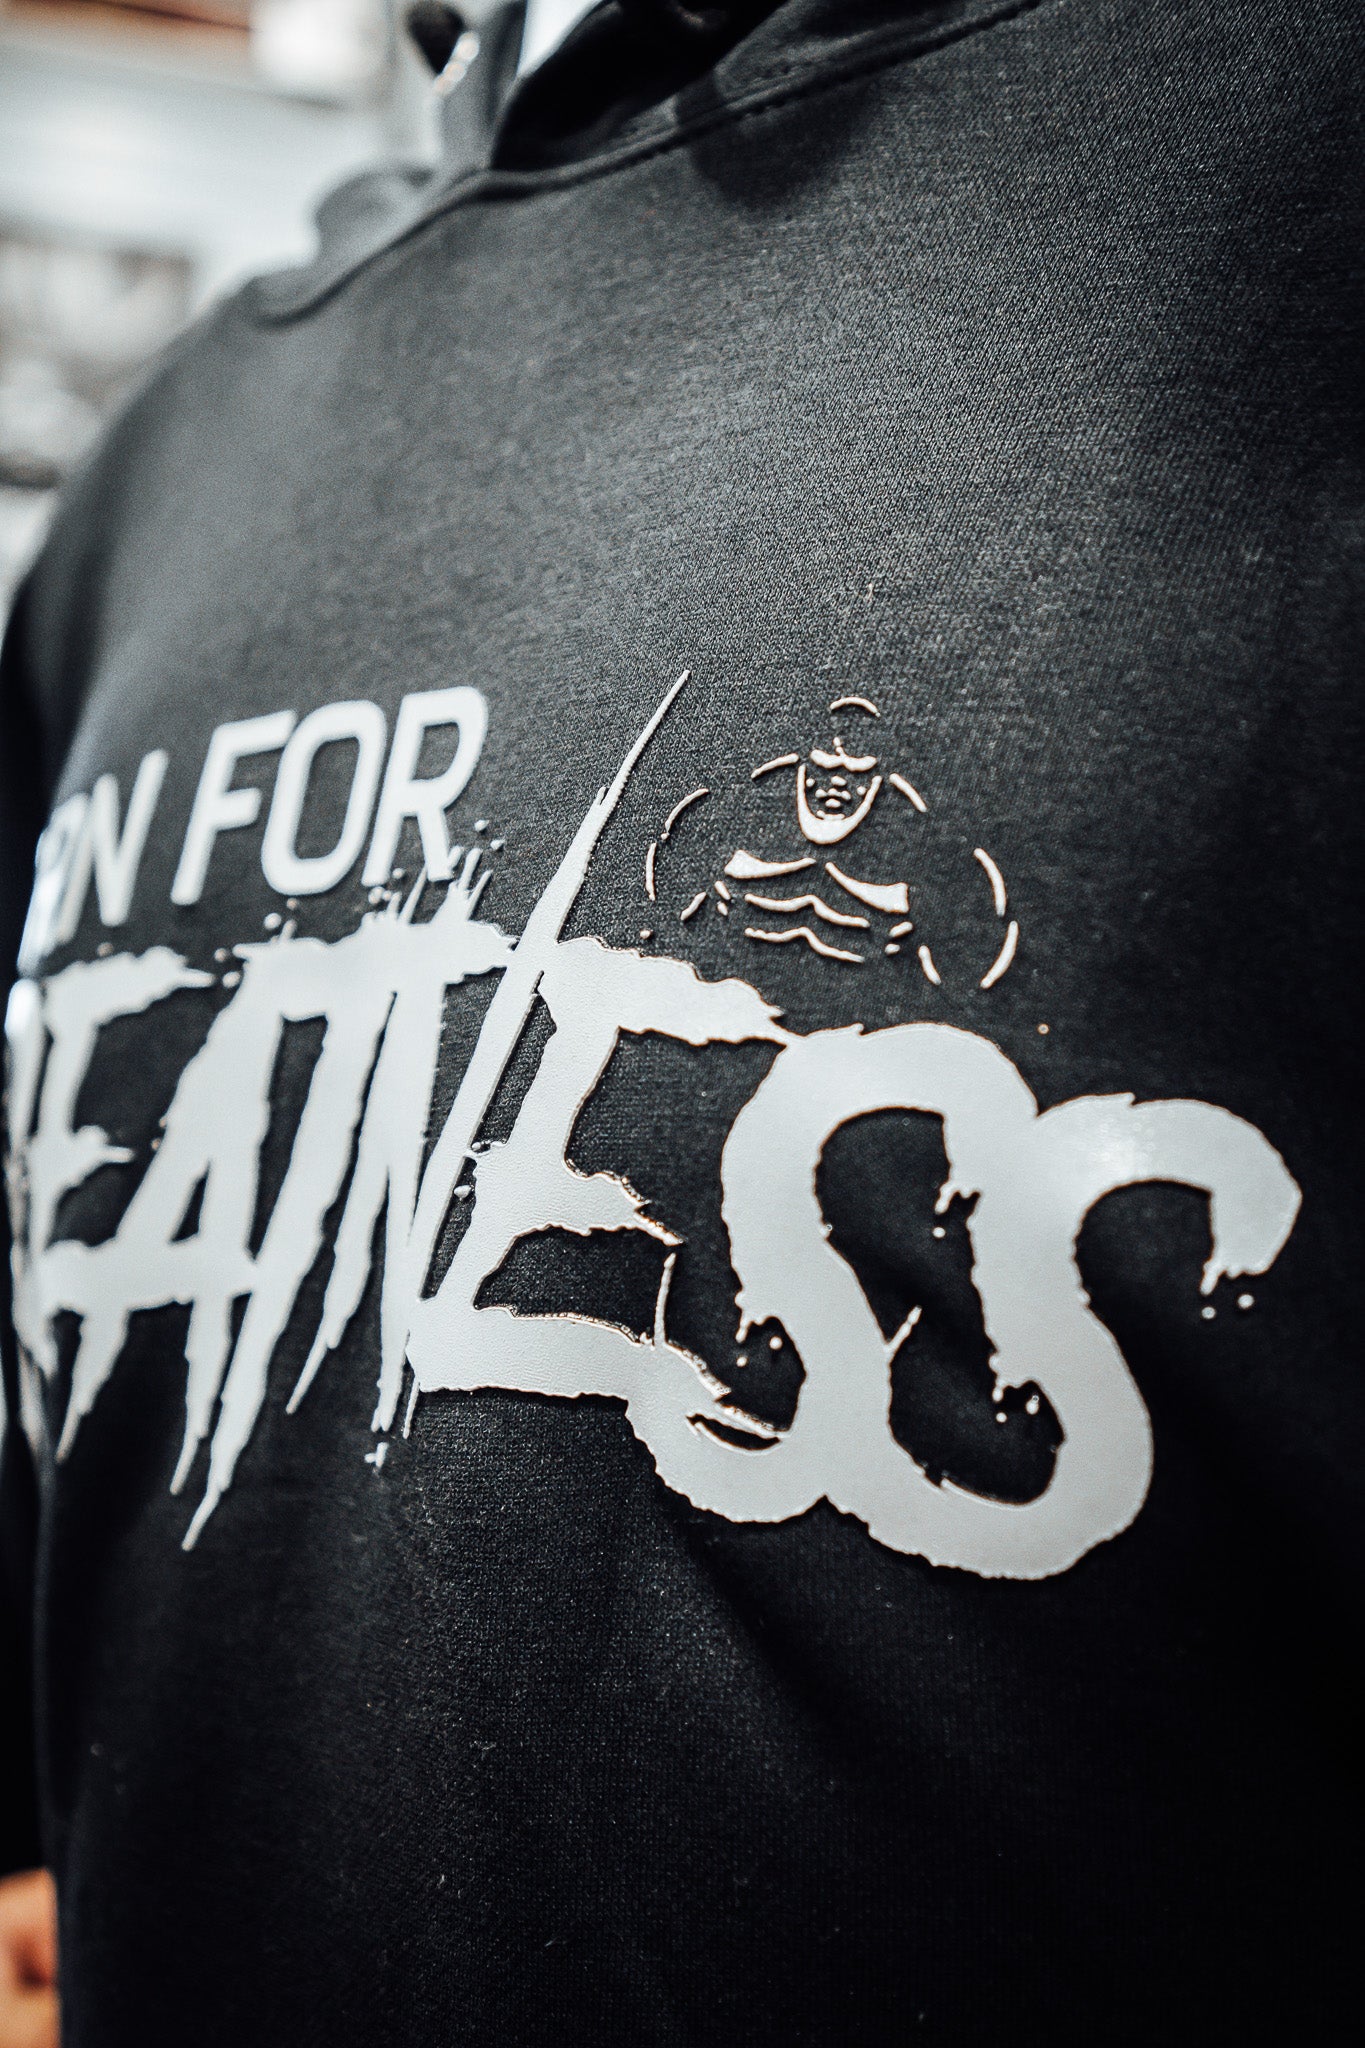 BORN FOR GREATNESS HOODIE